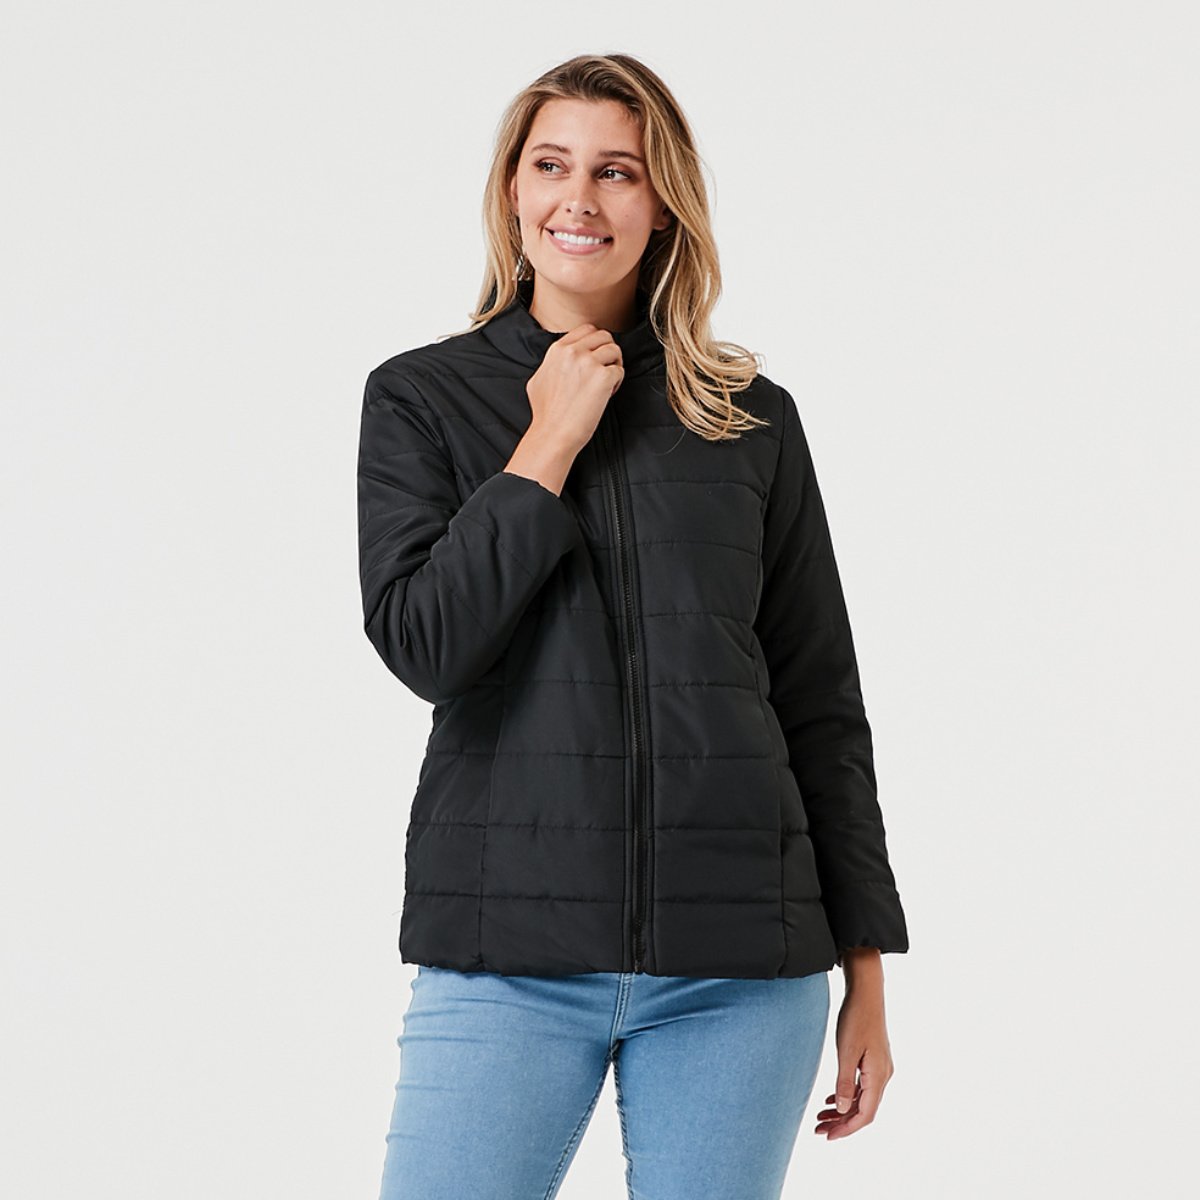 Affordable puffer jacket Australia: Our six favourite picks for 2020.